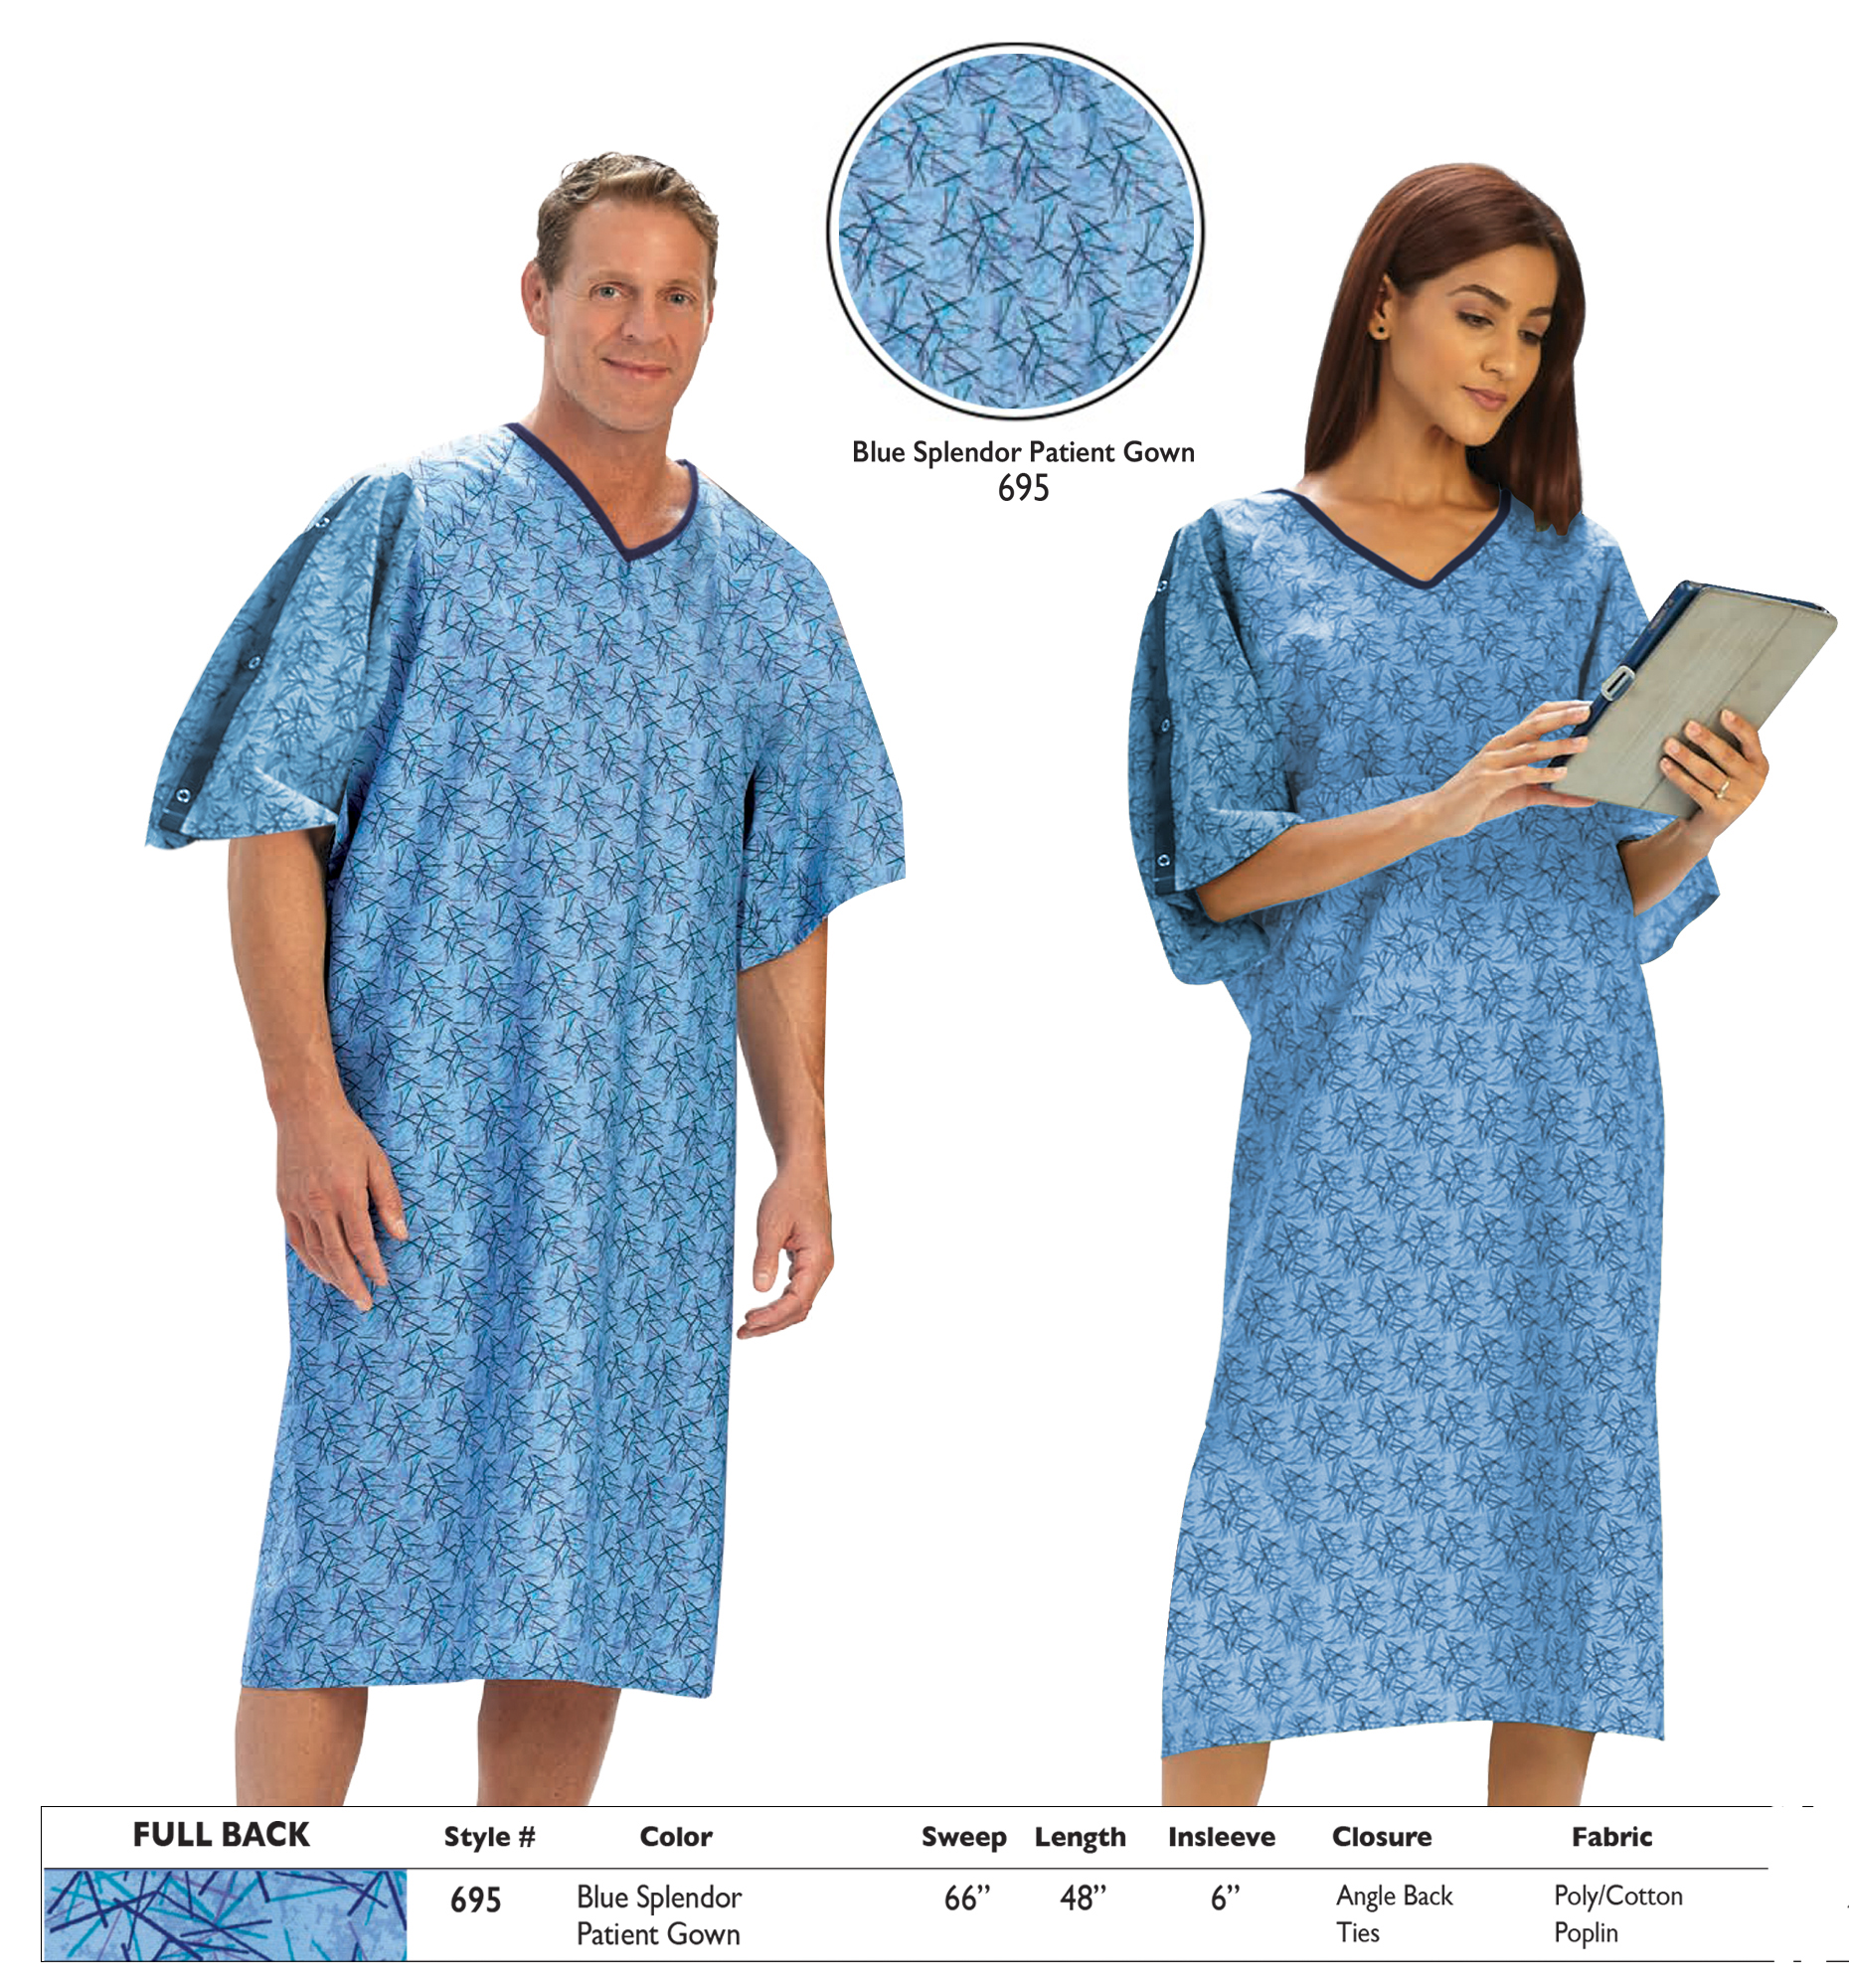 Overlap Snap Back Closure Gowns with I.V. Sleeves (1 Dozen) - BH Medwear